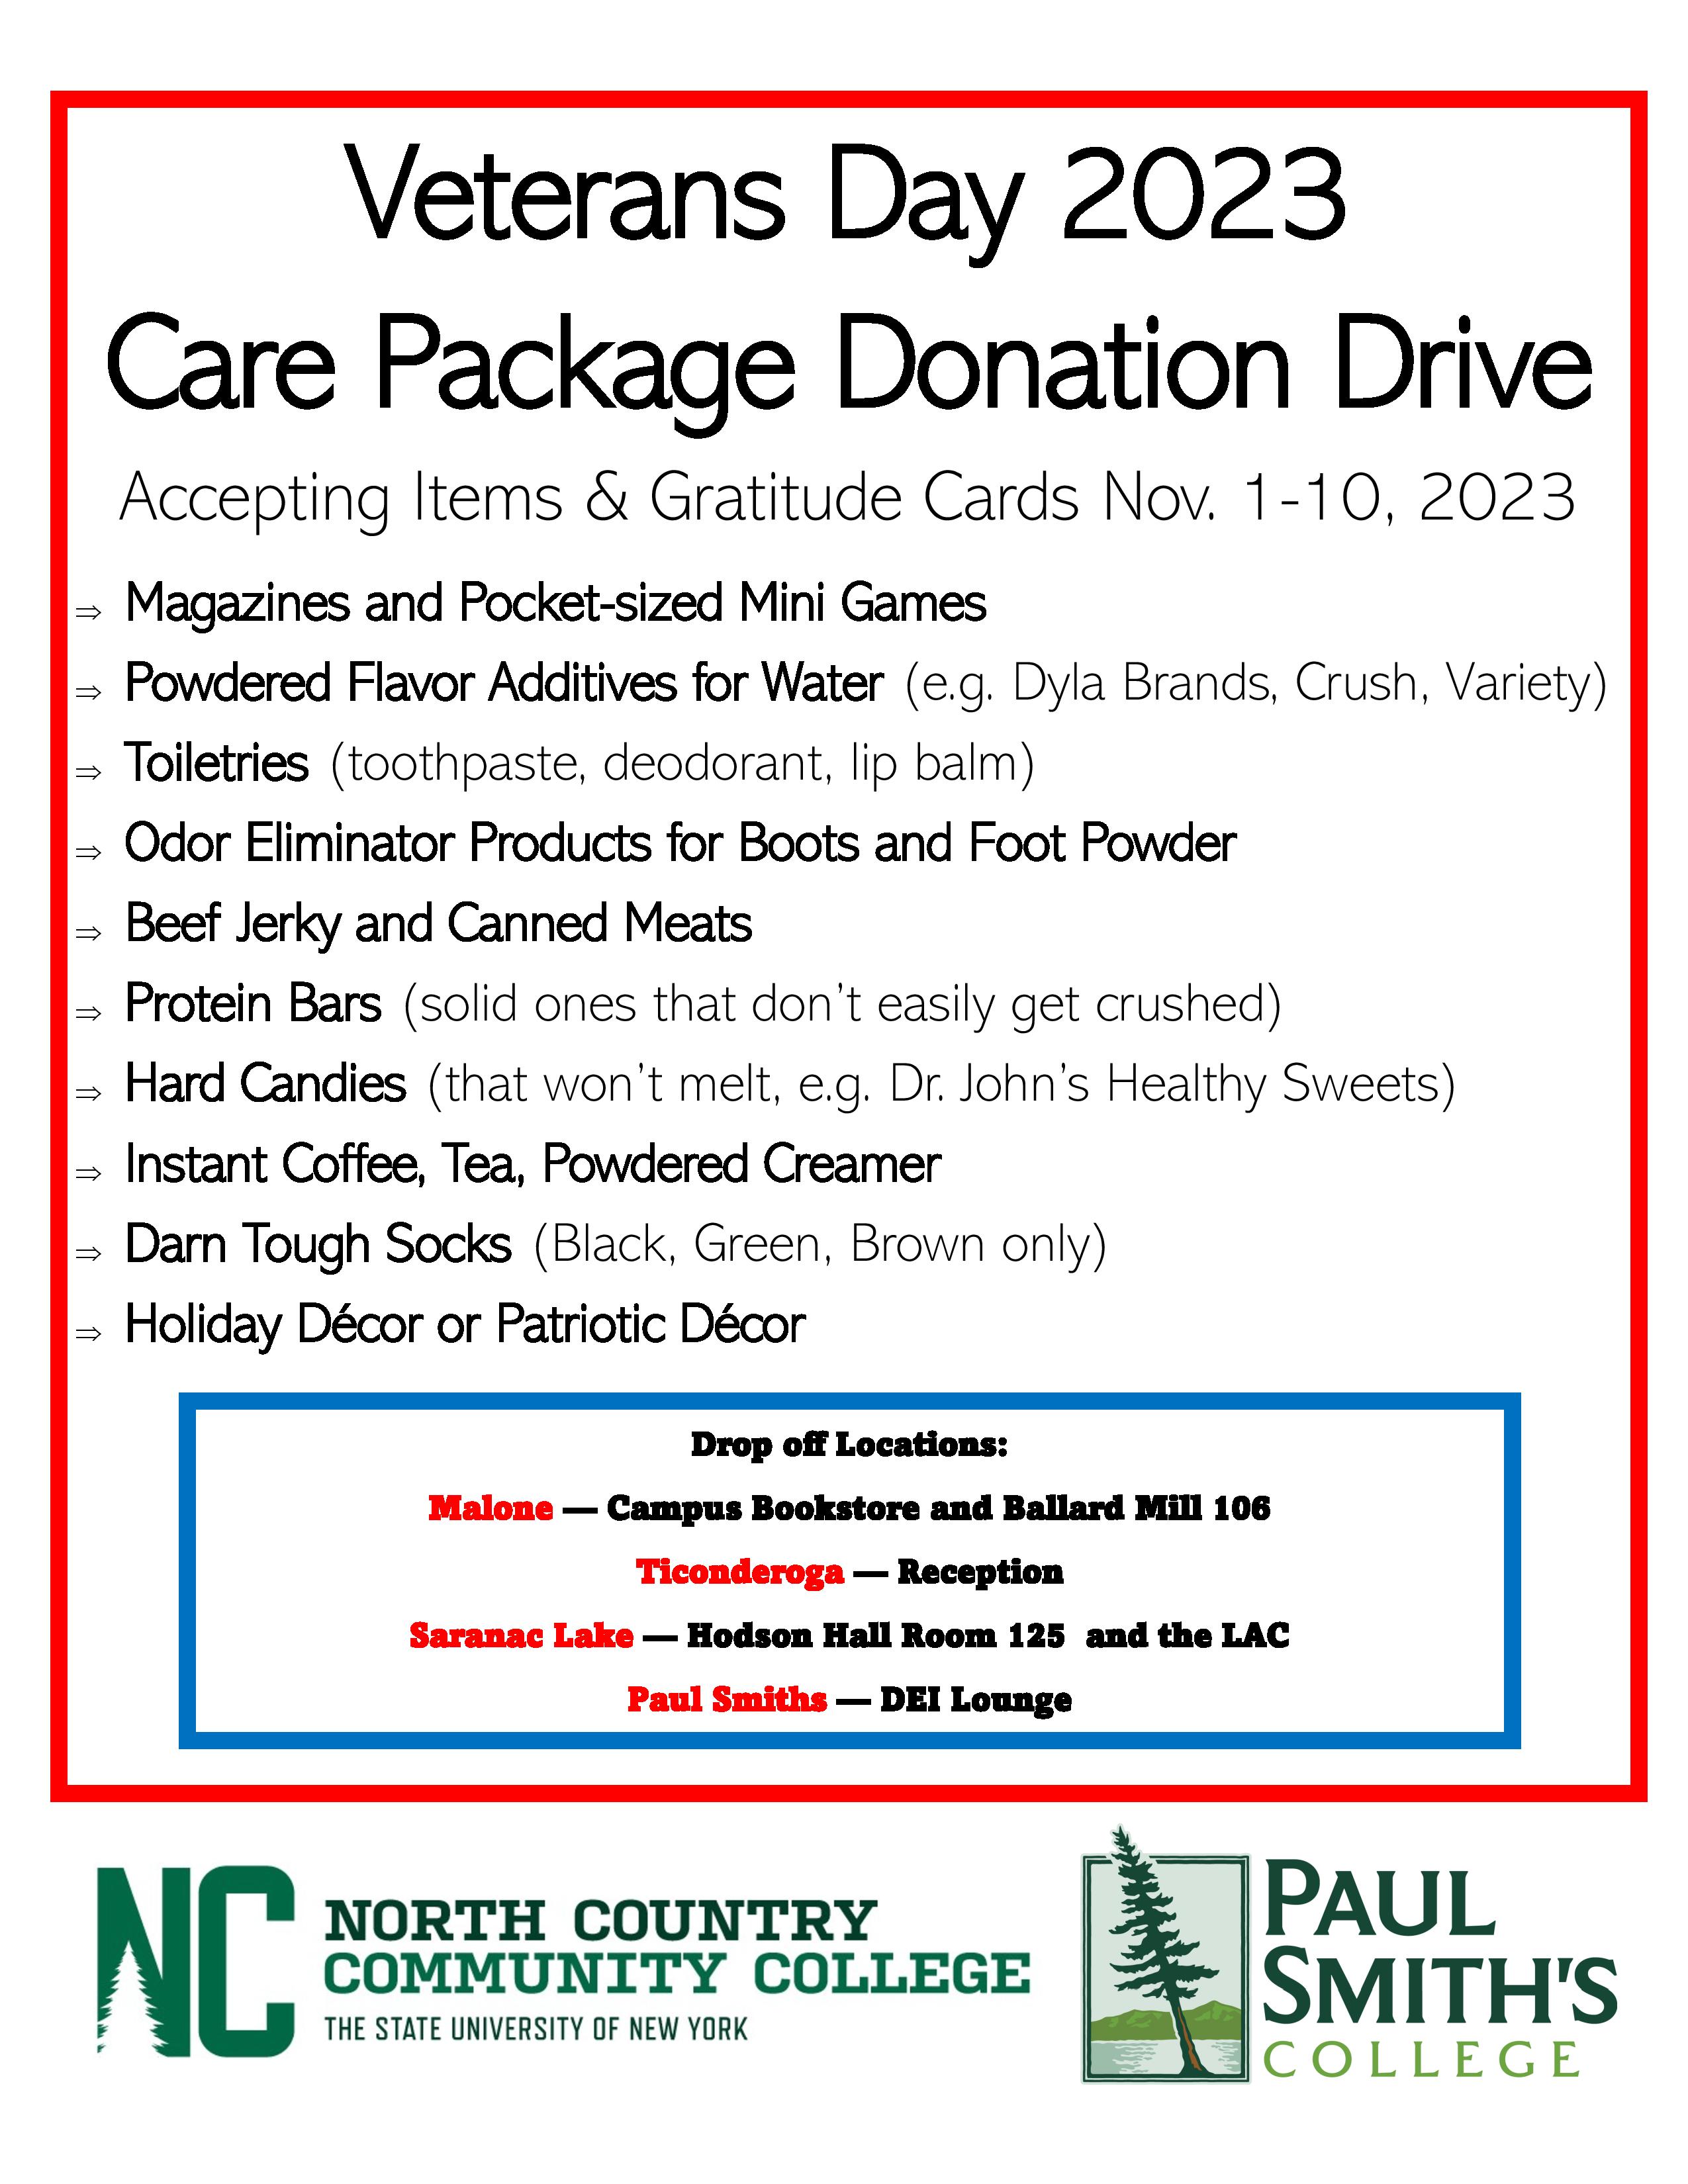 A flyer outlining how to contribute to a Care Package Drive for veterans